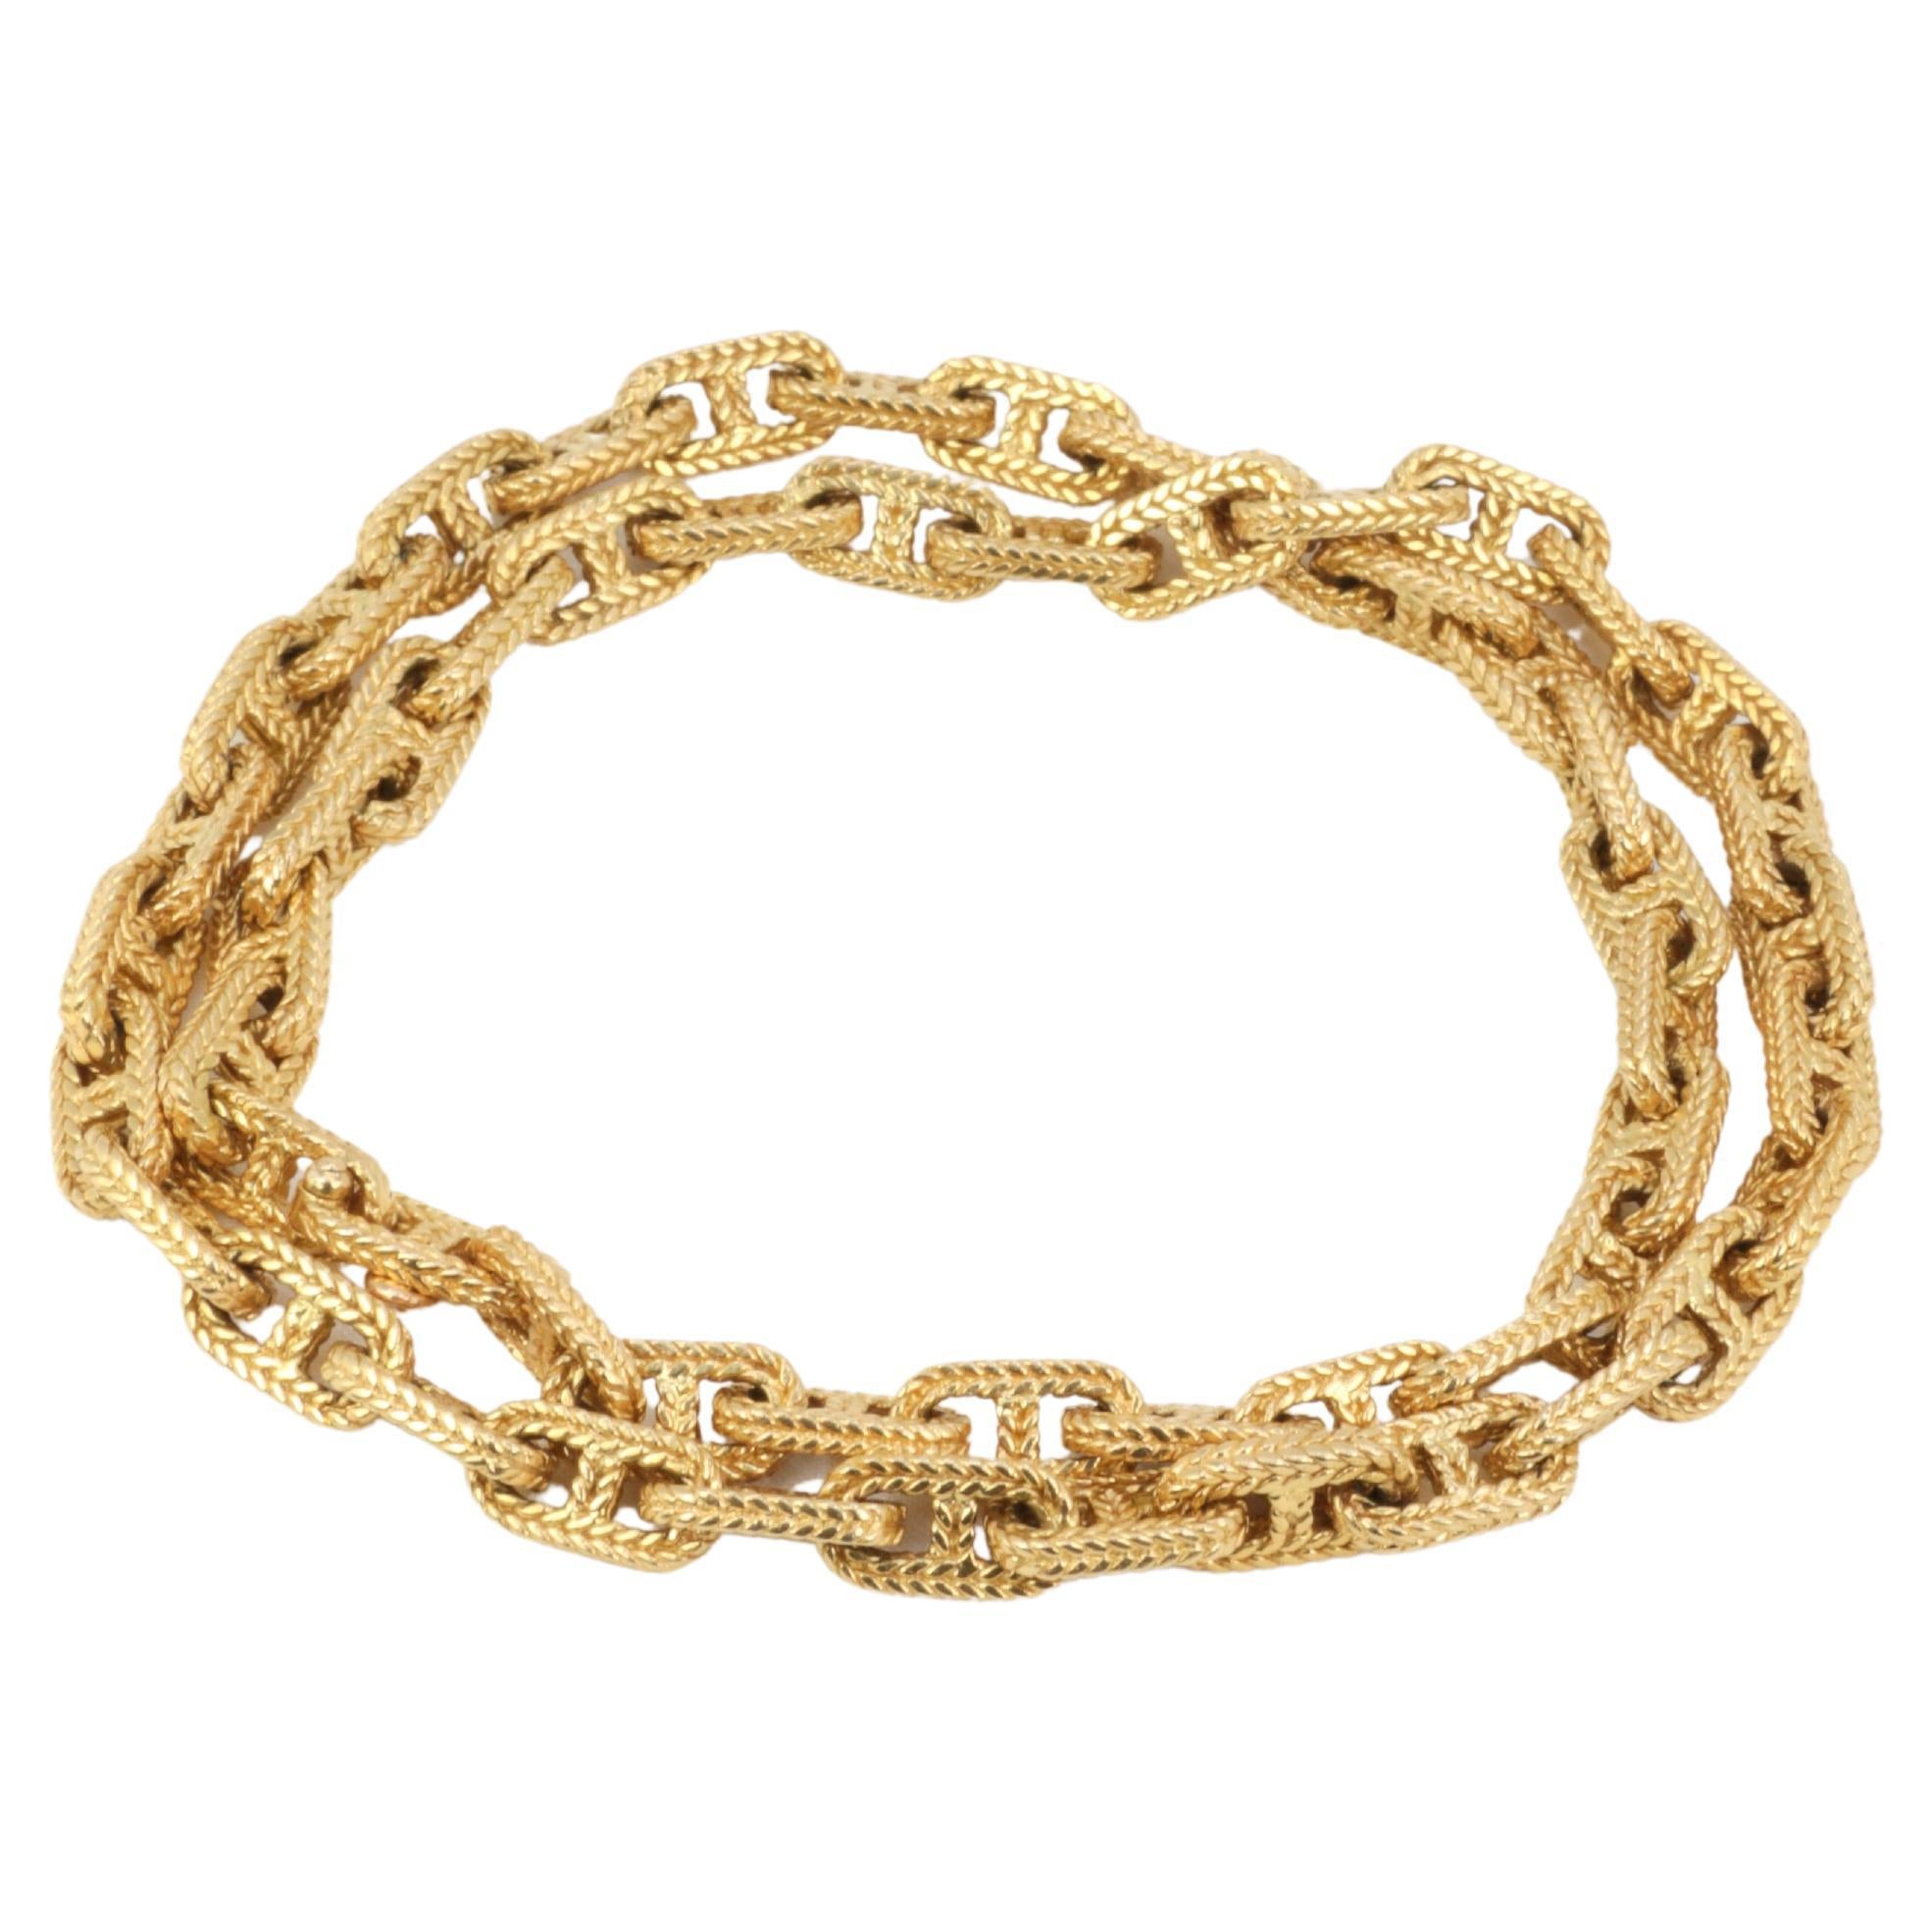 HERMES by Georges Lenfant, Anchor chain necklace in yellow gold